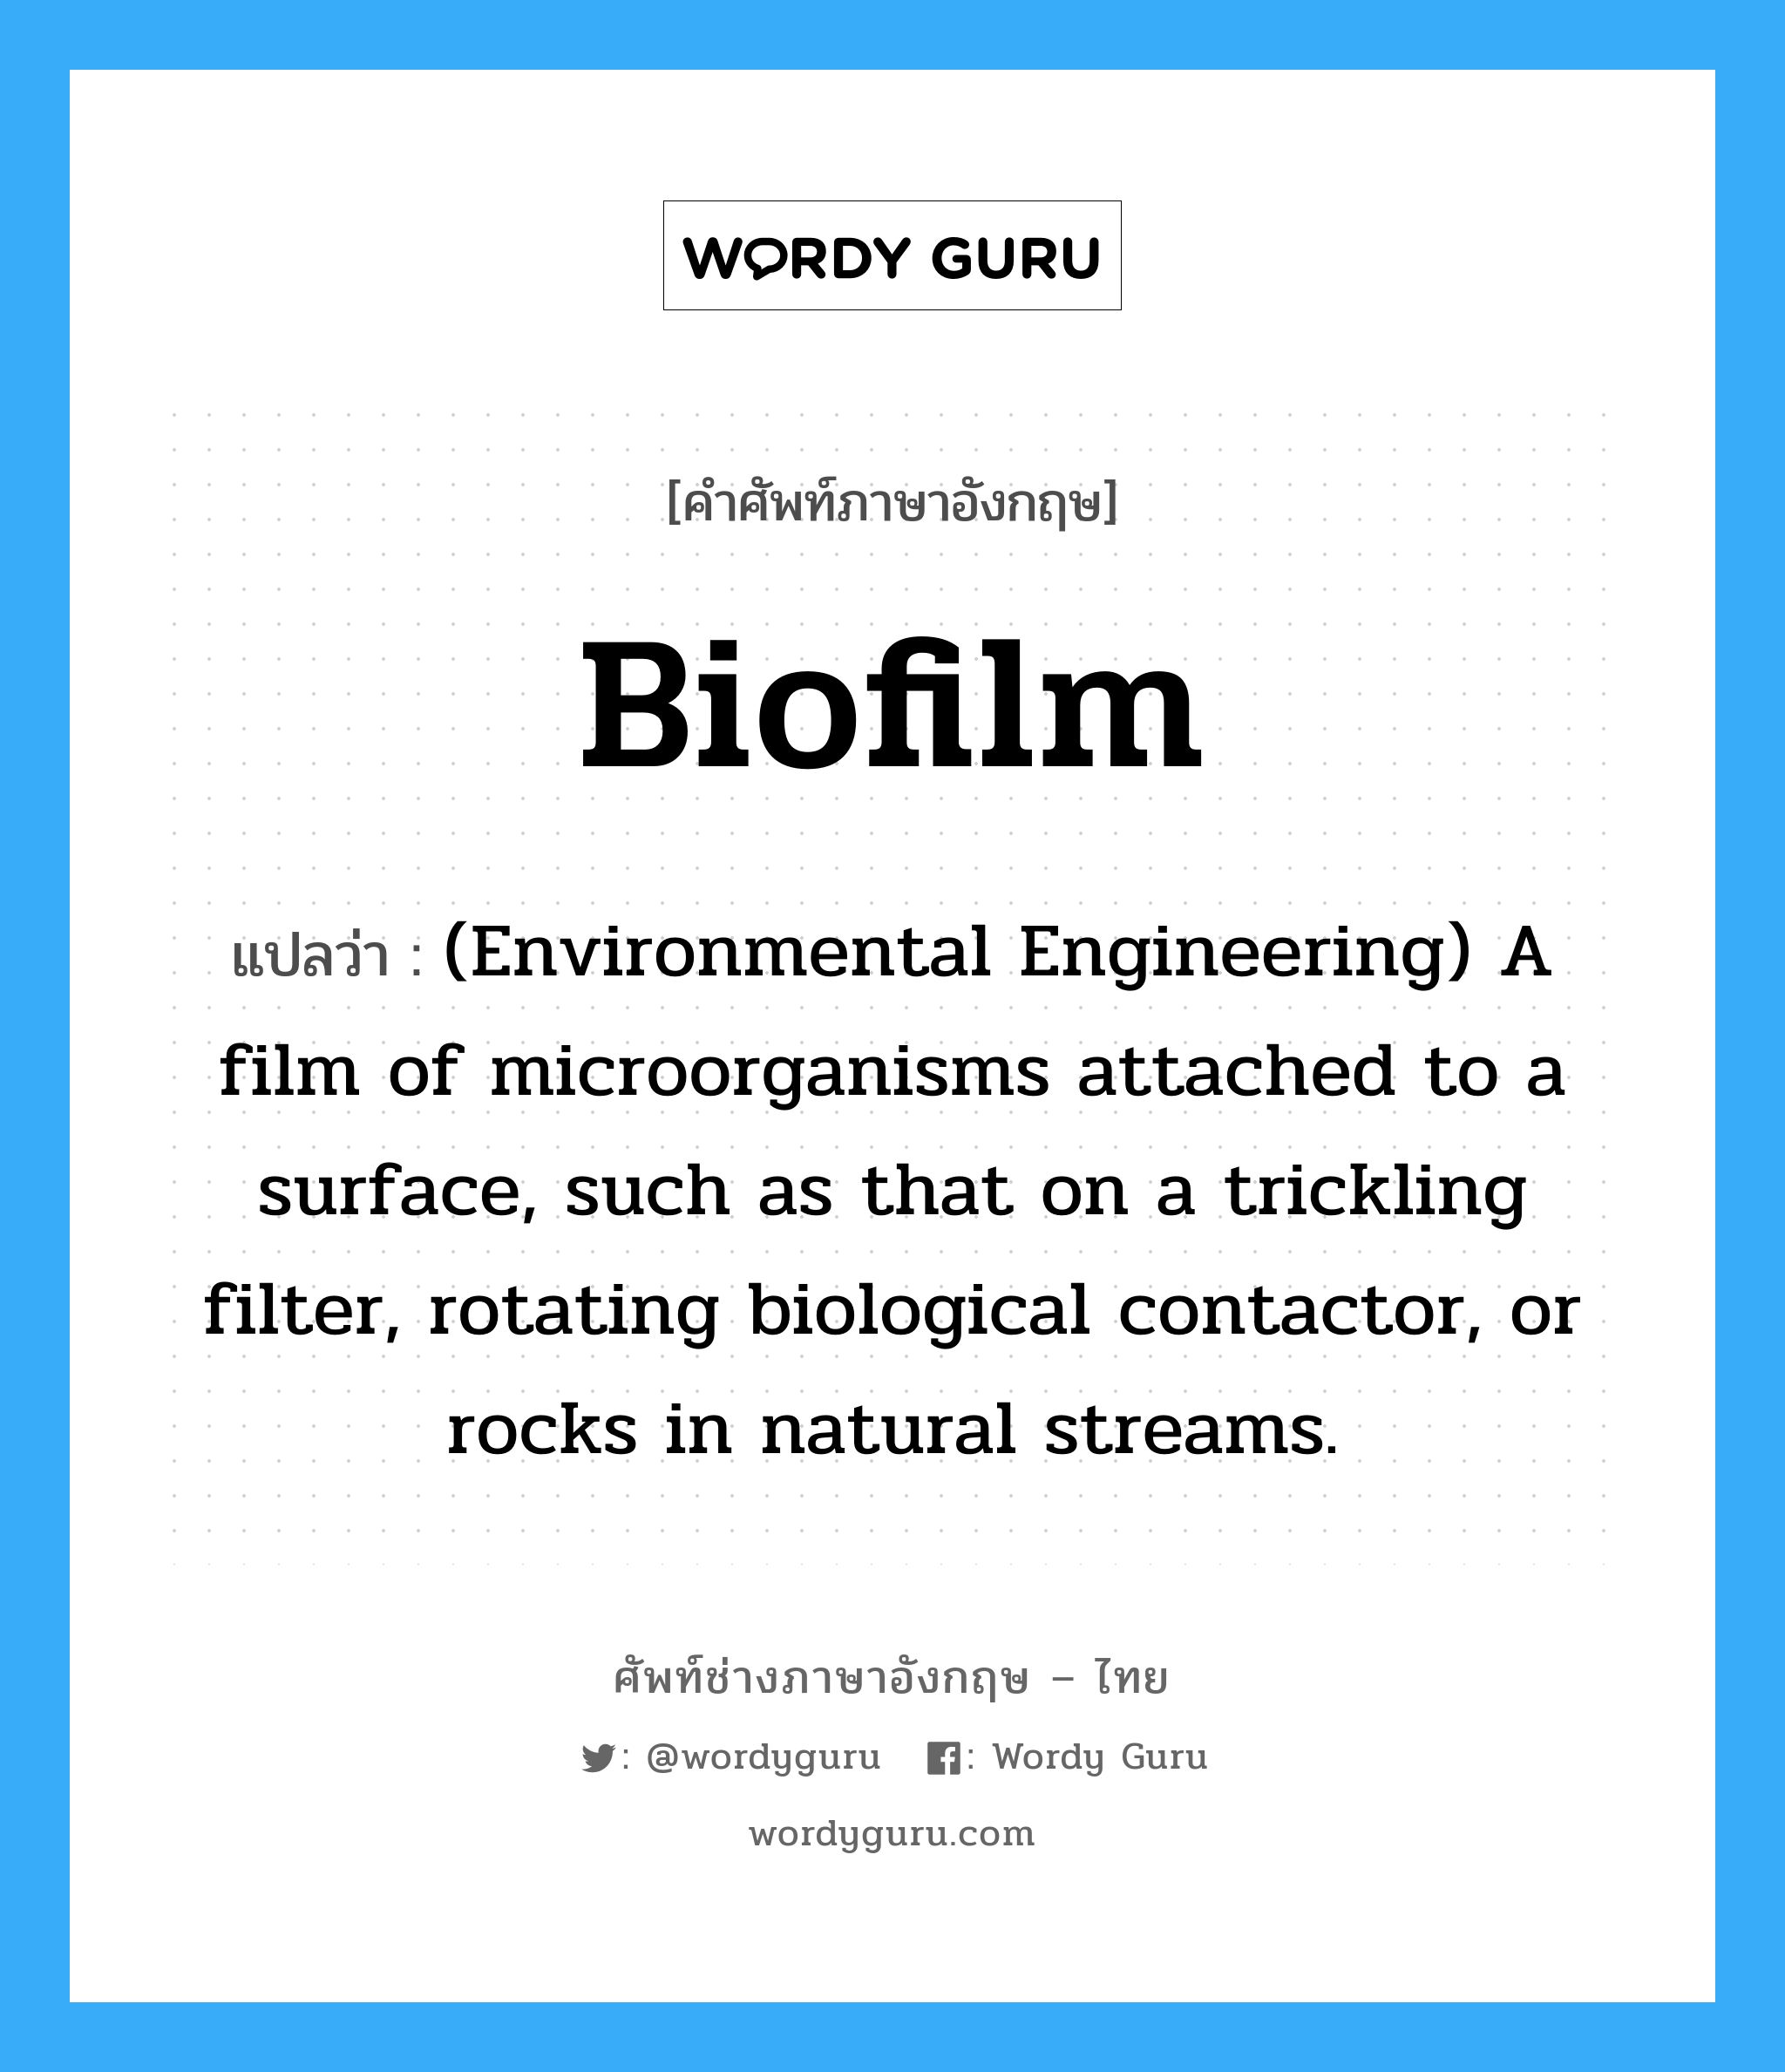 (Environmental Engineering) A film of microorganisms attached to a surface, such as that on a trickling filter, rotating biological contactor, or rocks in natural streams. ภาษาอังกฤษ?, คำศัพท์ช่างภาษาอังกฤษ - ไทย (Environmental Engineering) A film of microorganisms attached to a surface, such as that on a trickling filter, rotating biological contactor, or rocks in natural streams. คำศัพท์ภาษาอังกฤษ (Environmental Engineering) A film of microorganisms attached to a surface, such as that on a trickling filter, rotating biological contactor, or rocks in natural streams. แปลว่า Biofilm